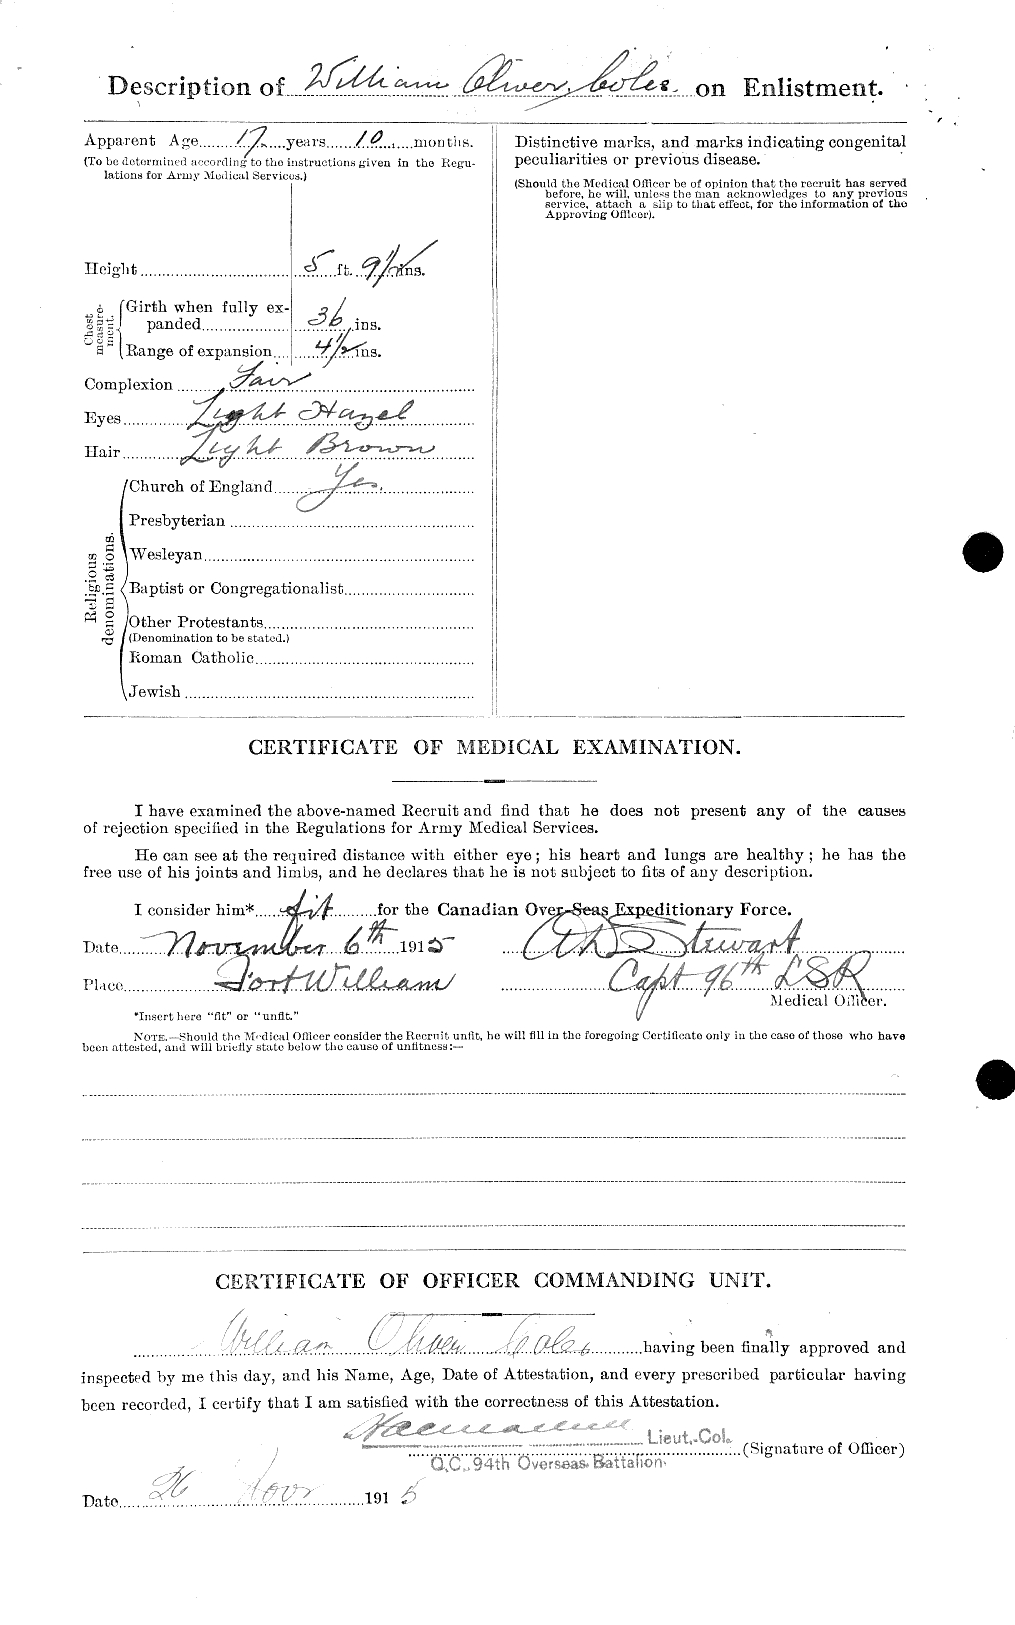 Personnel Records of the First World War - CEF 028441b